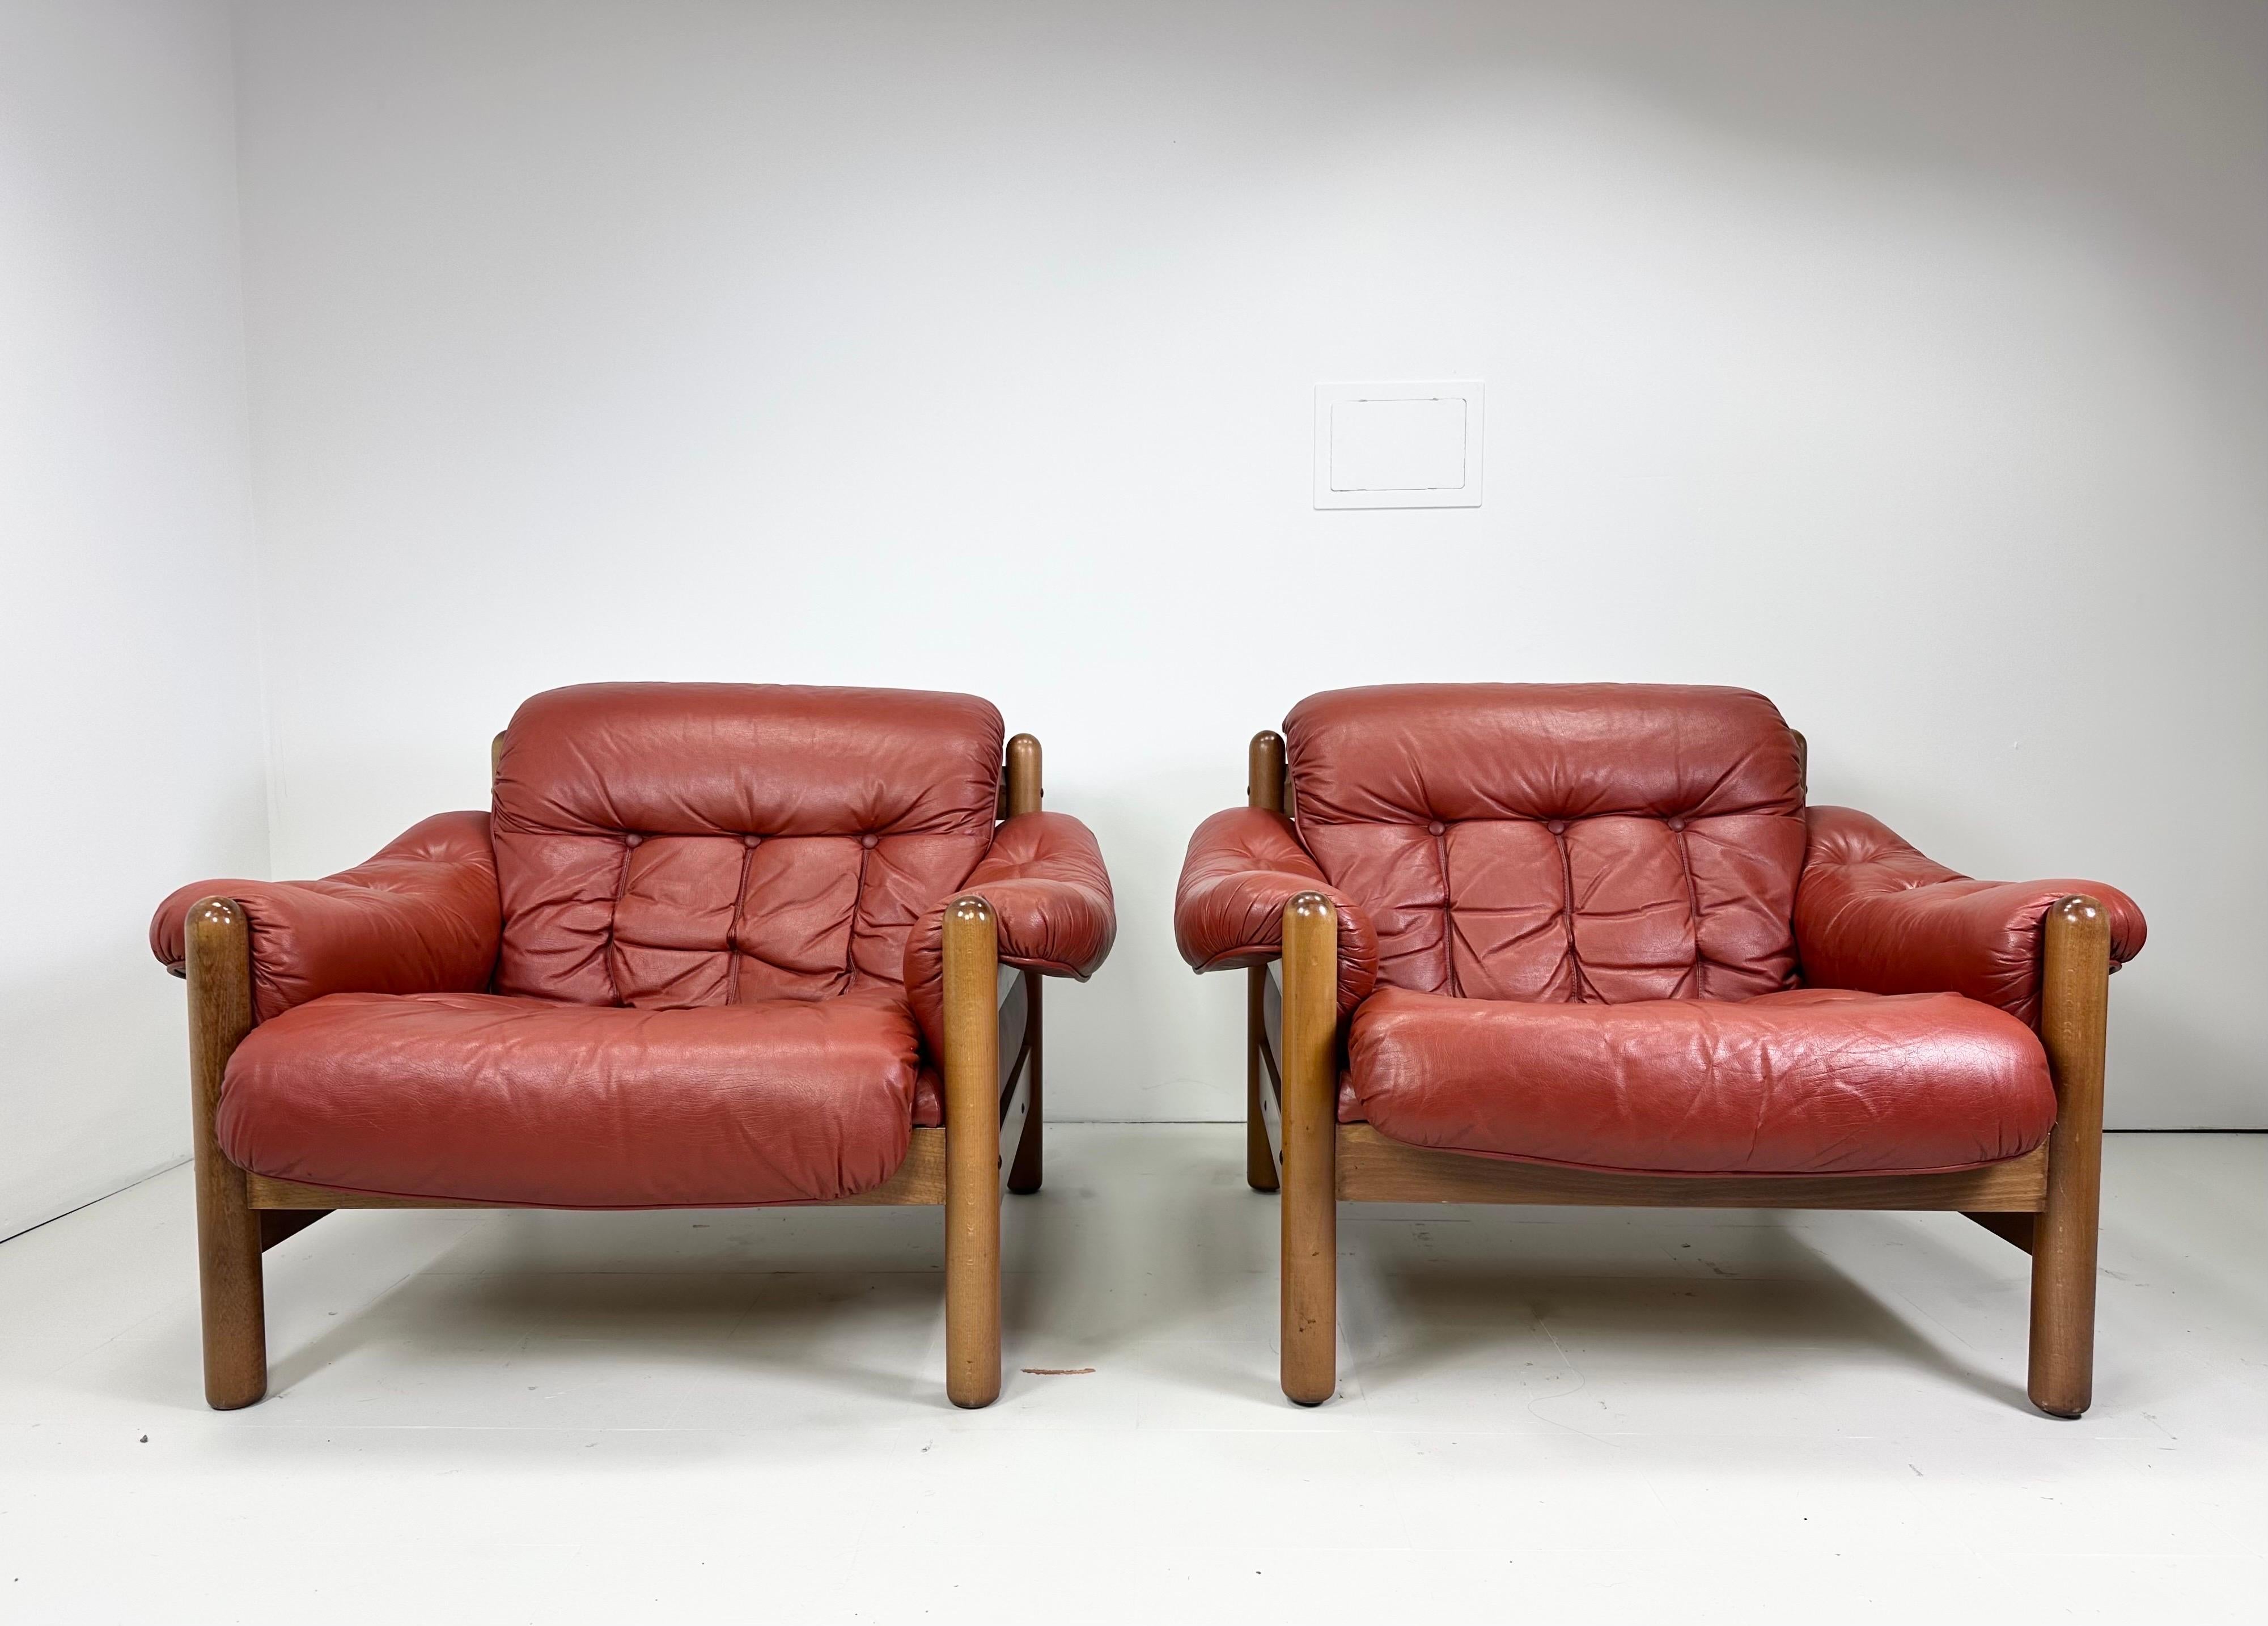 1970’s Leather Lounge chairs. Made in Sweden. Unique leather tufting. Chairs sit low and are comfortable. Matching sofa available.

Delivery to NYC area for $375. Please inquire.